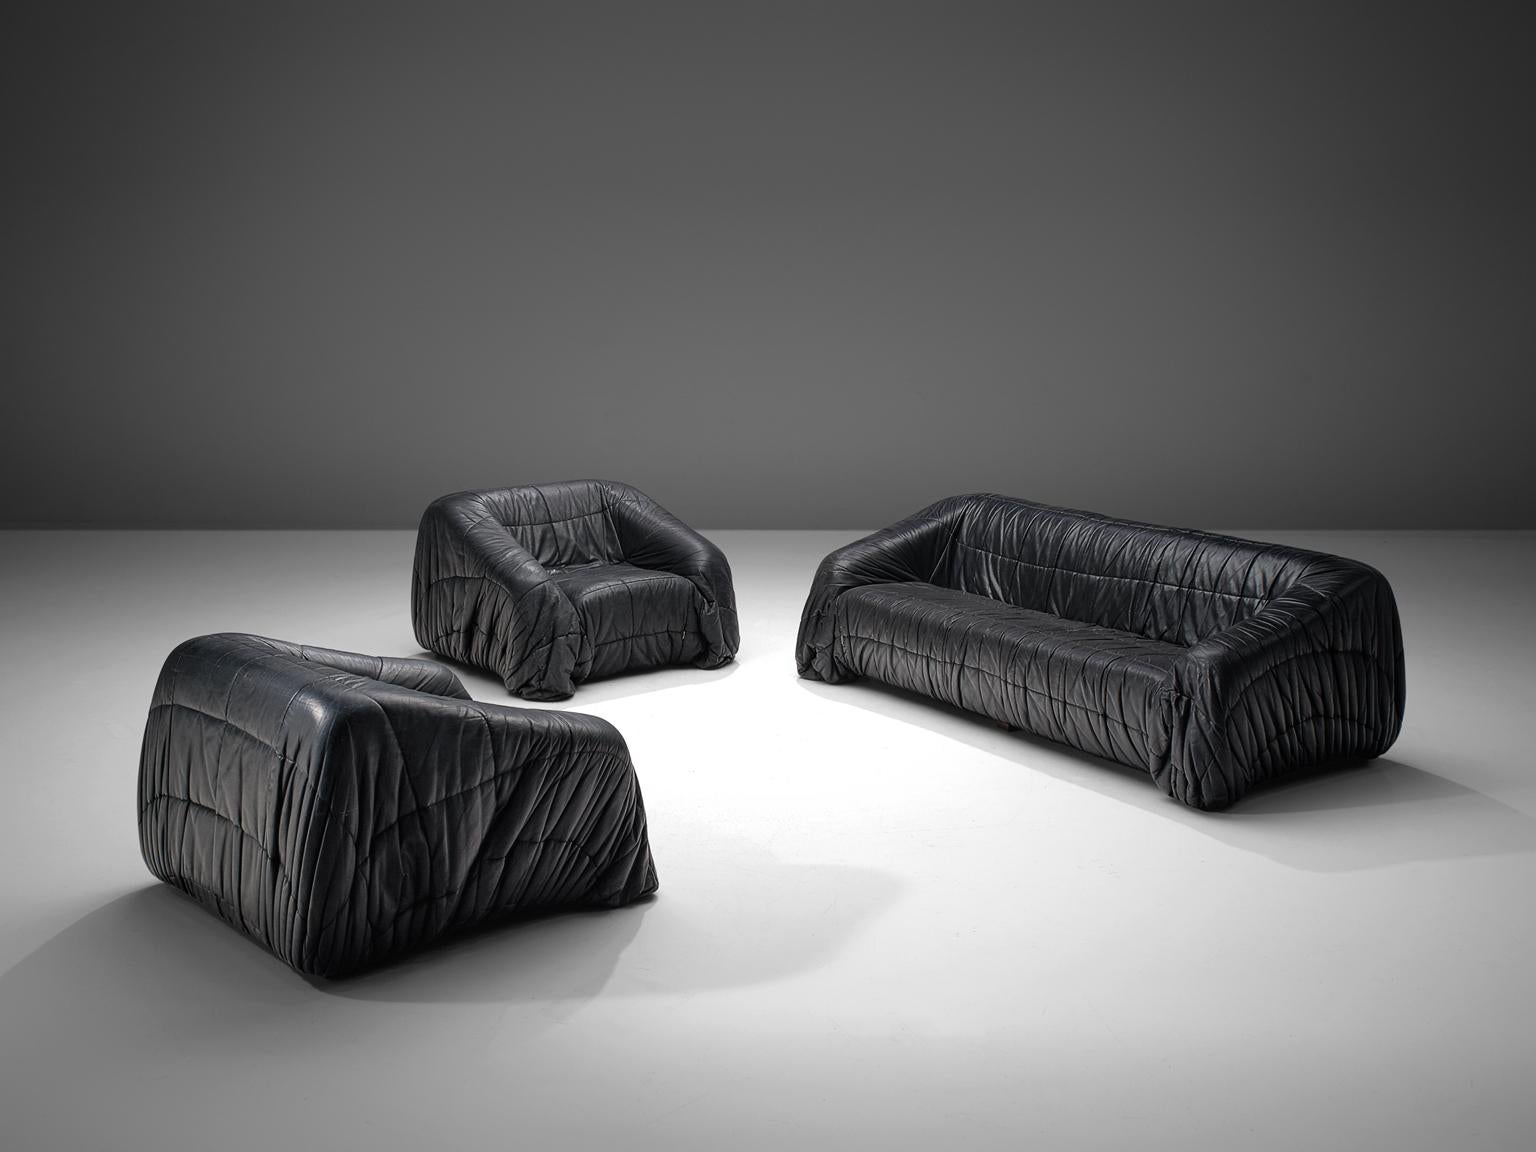 Jonathan de Pas, Donato D'urbino & Paolo Lomazzi for Dell'Oca, 'Piumino' lounge living room set, black leatherette, Italy, 1970. 

These lounge chairs and sofa are completely moulded out of foam and covered with folded black, thick butter-soft